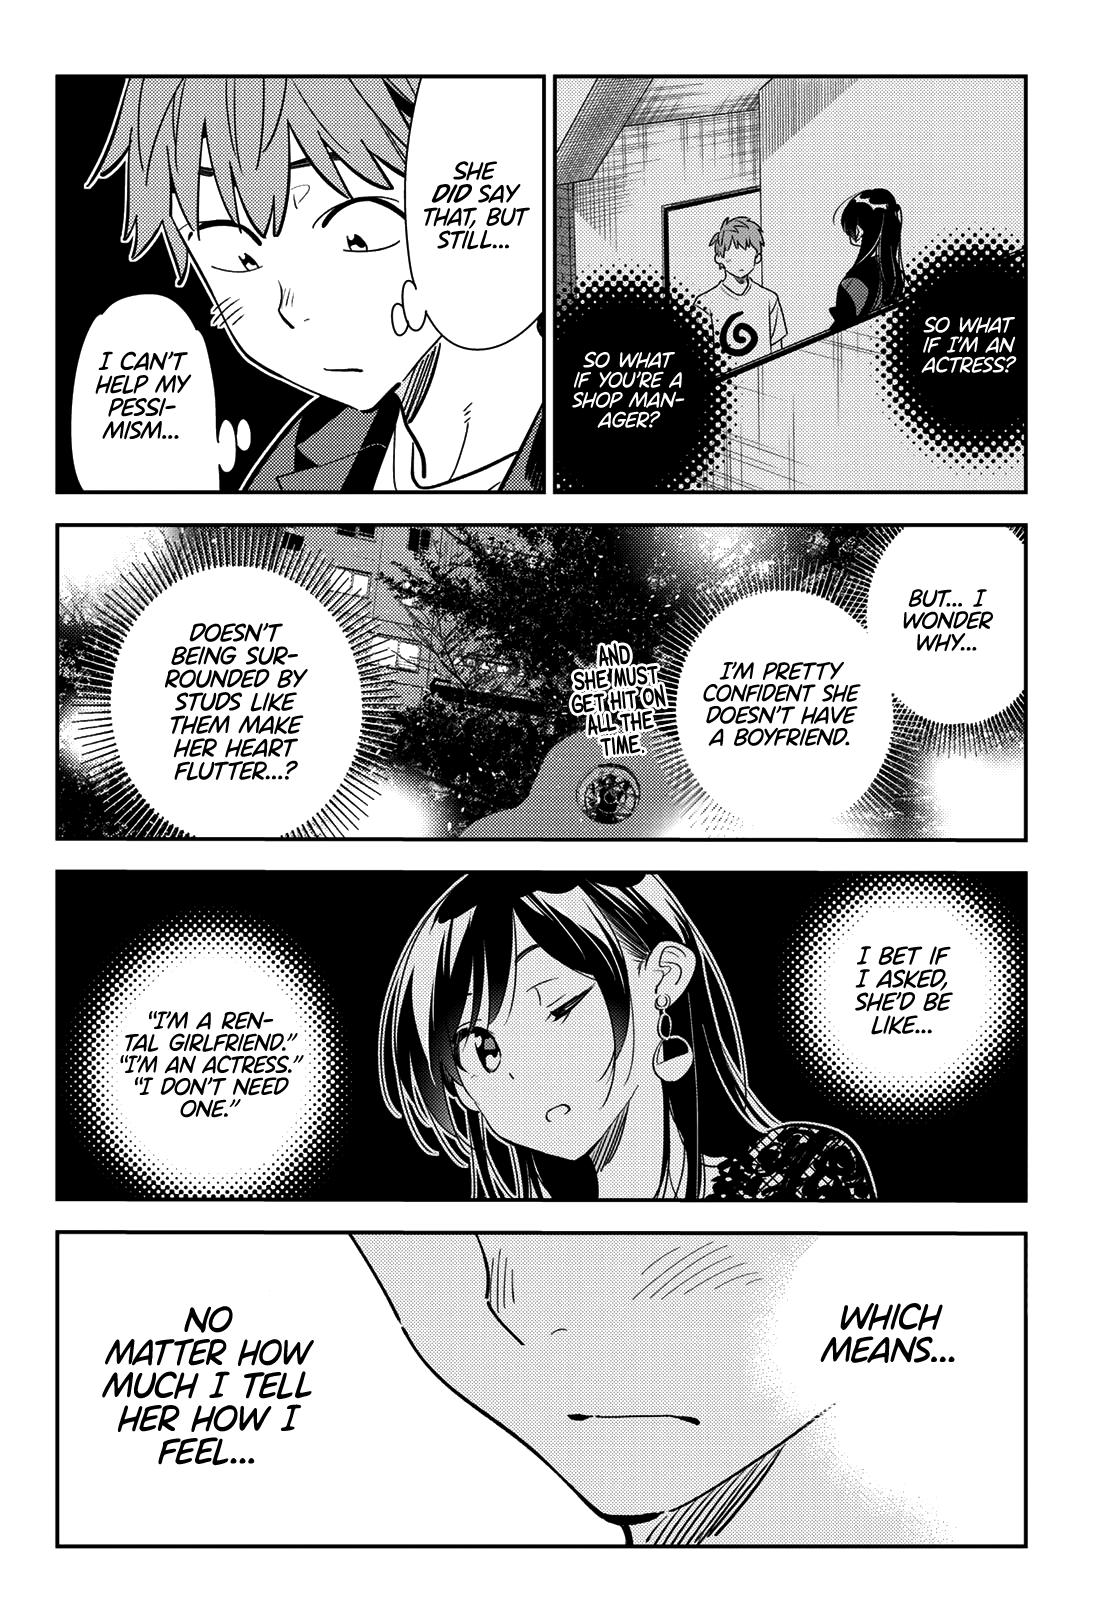 Rent A GirlFriend, Chapter 179 image 011